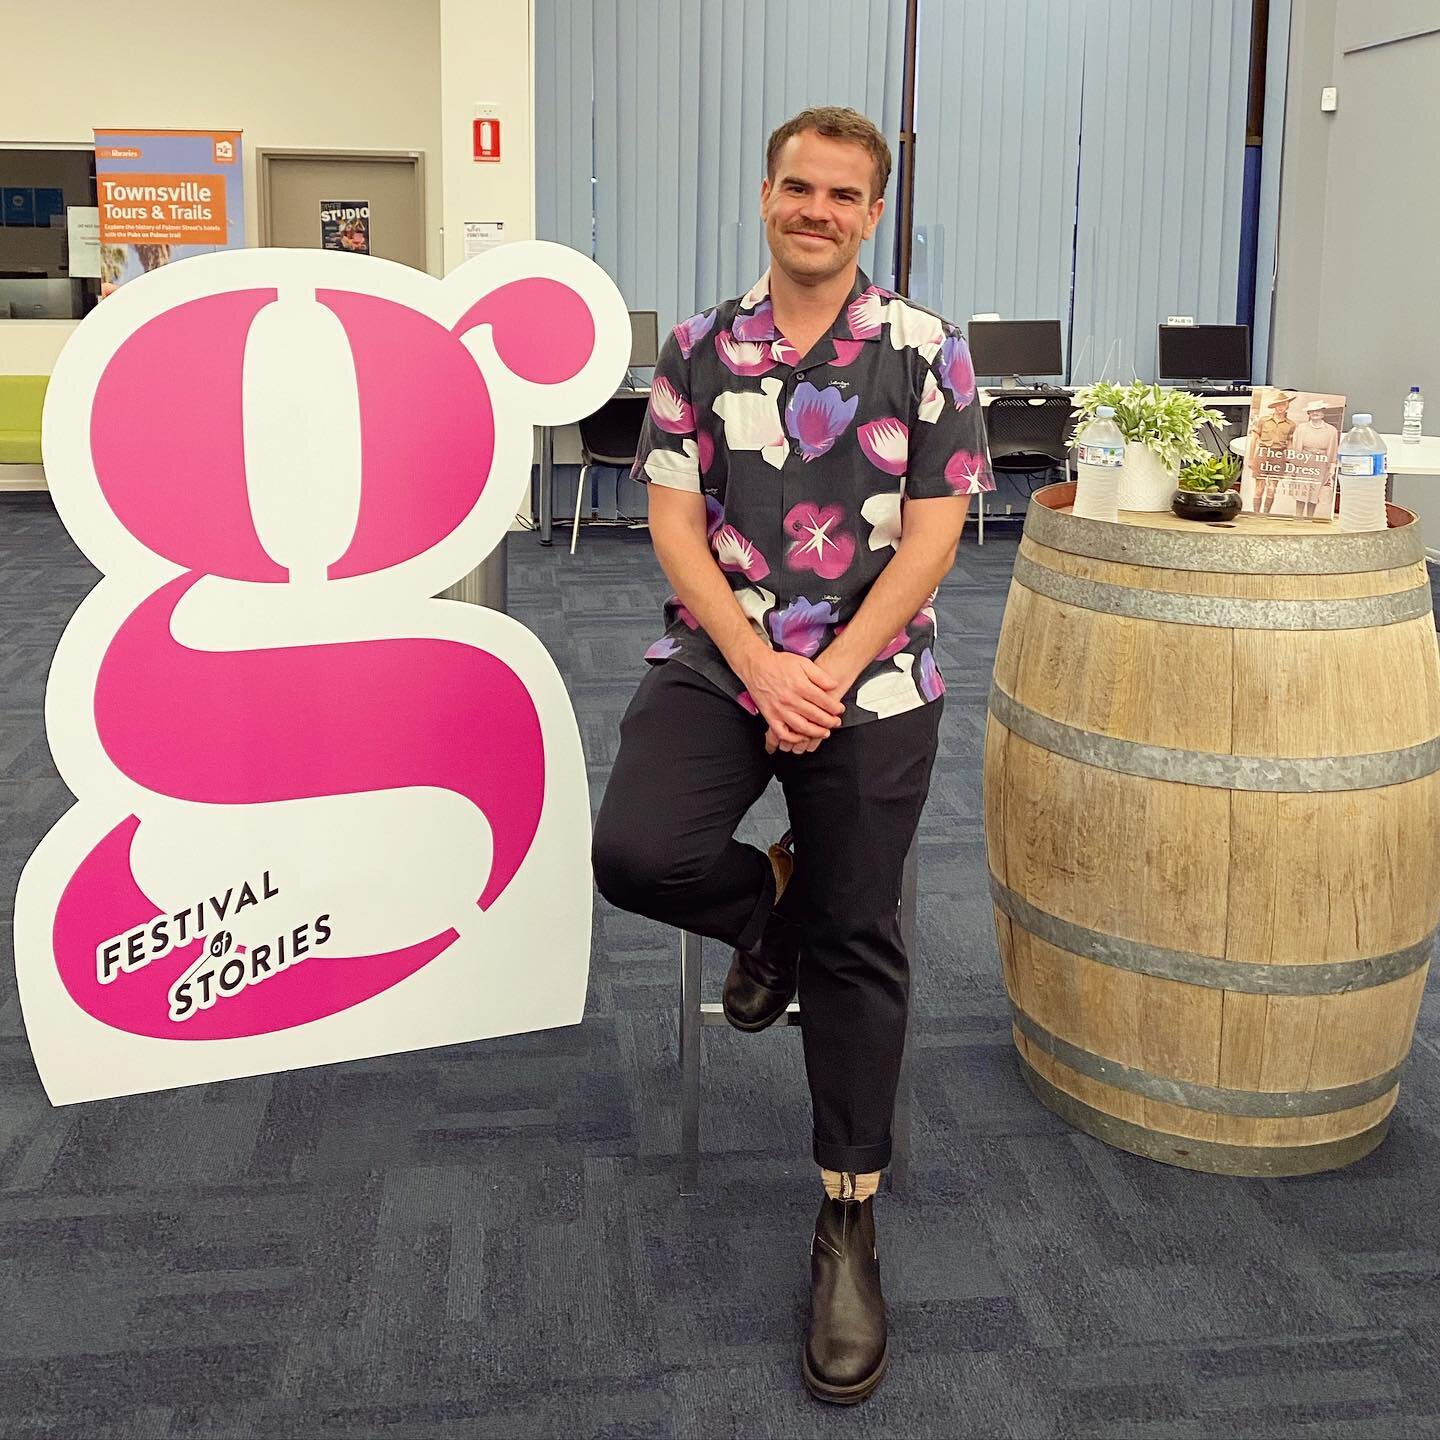 Feeling incredibly grateful after three days of Townsville&rsquo;s Festival of Stories. I was fortunate enough to meet some of the local community - passionate library staff, @marywhobooks crew, fellow writers and readers - at a Q&amp;A, workshop and